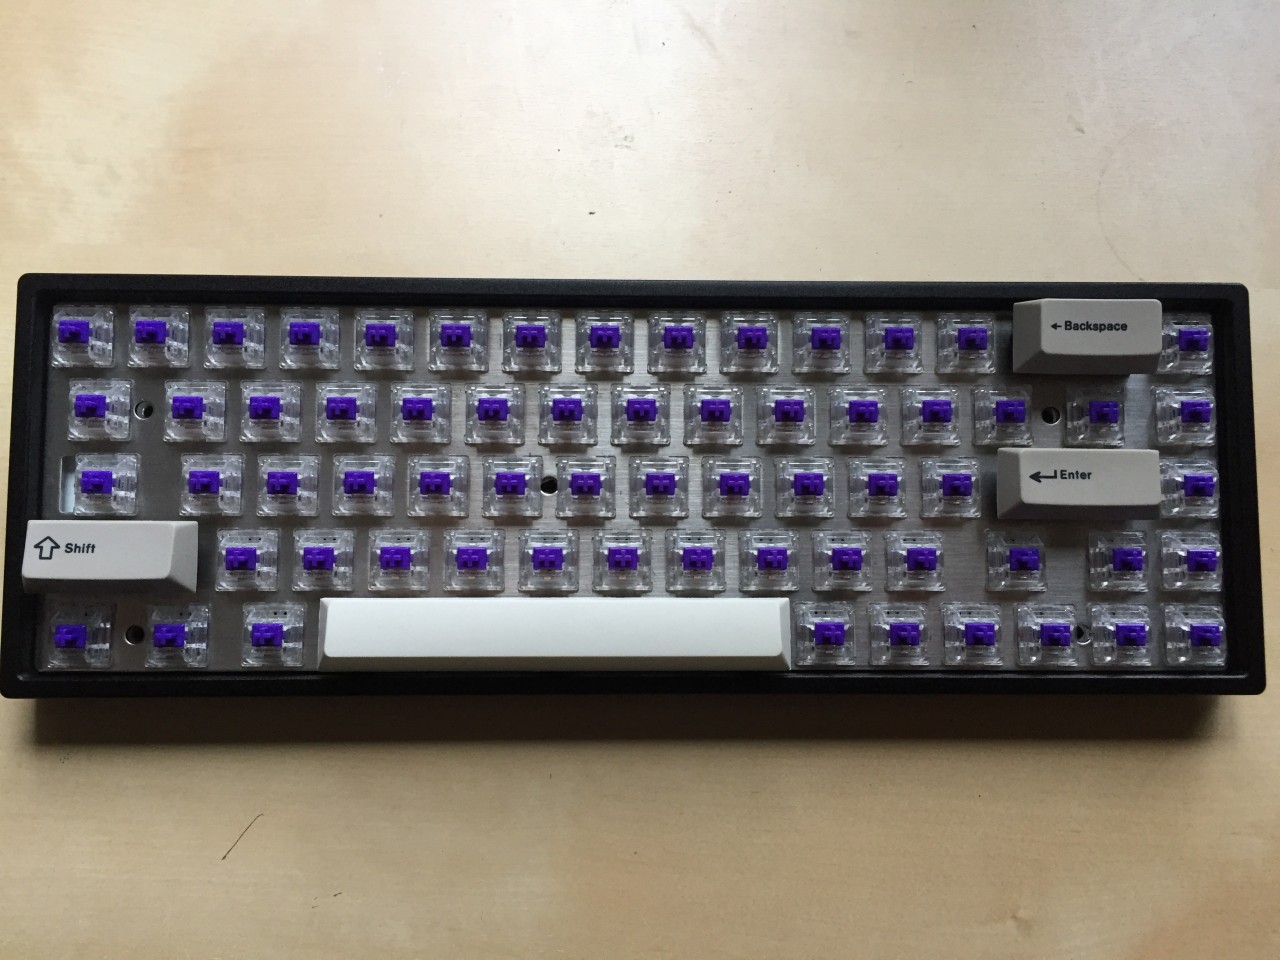 Make extra sure the stabilizers are in the right place by installing those keycaps and making sure it fits in the case correctly